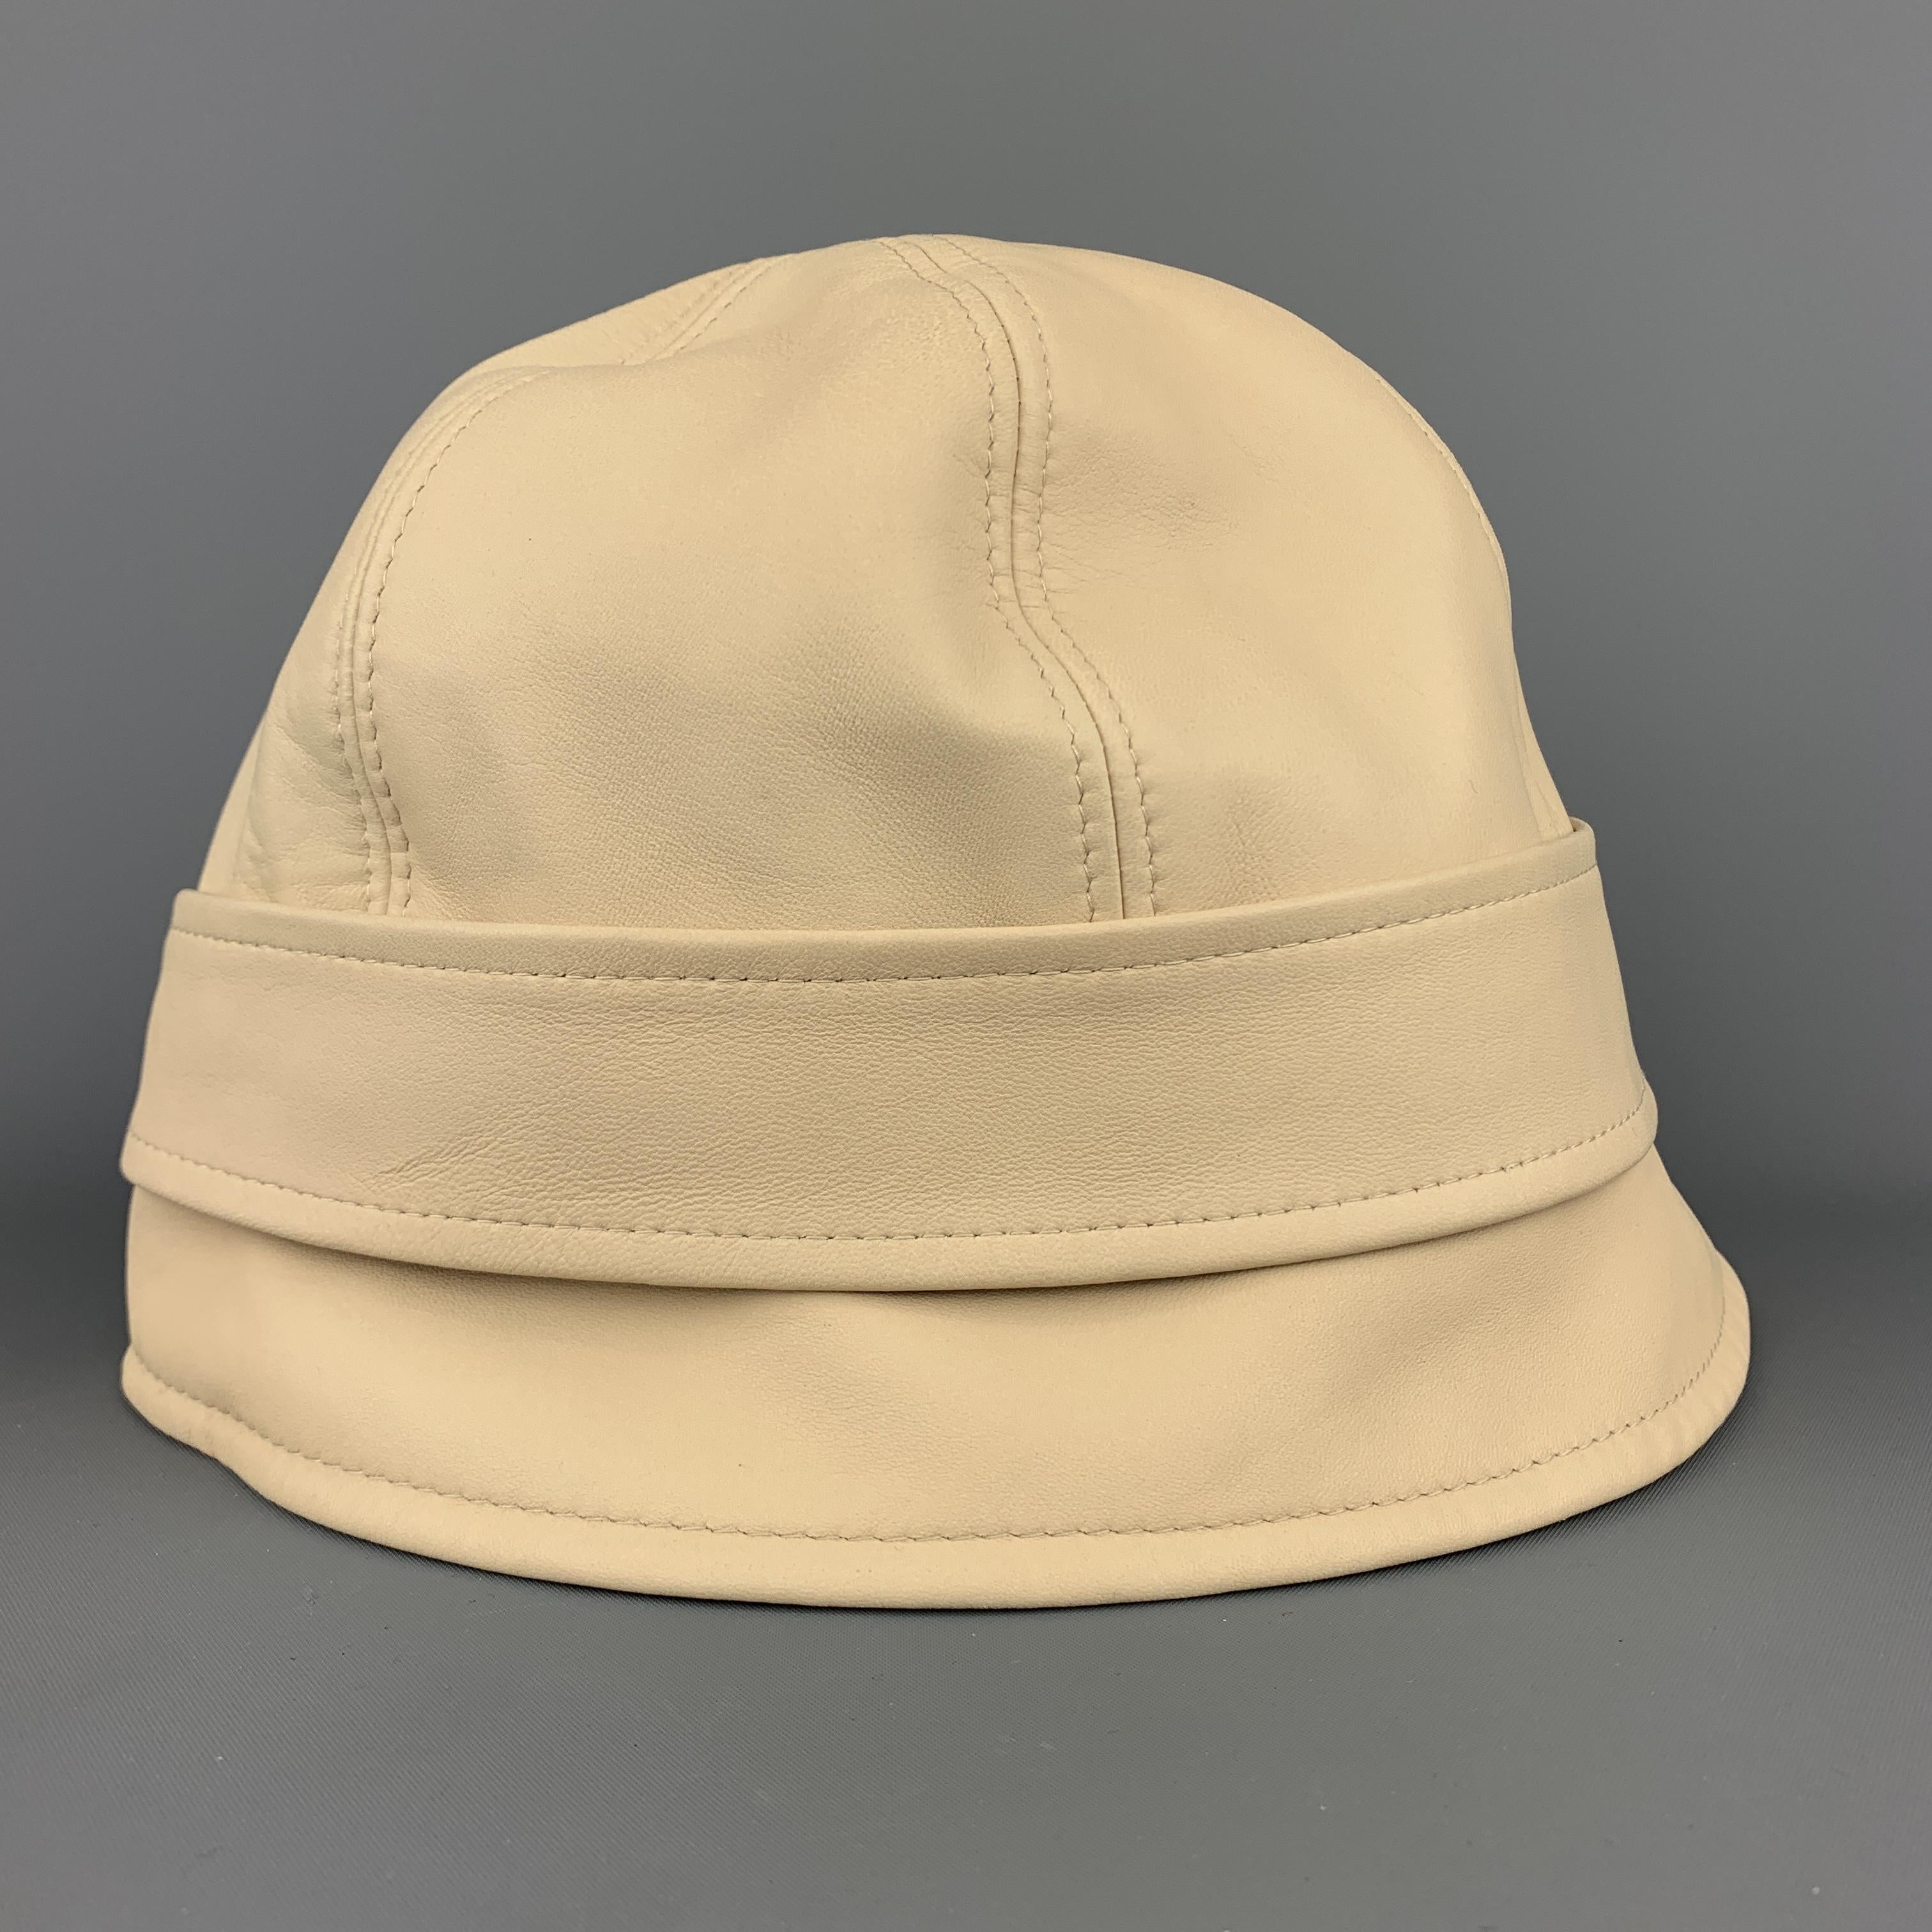 AGNONA vintage bucket style hat comes in beige leather with a strap and cream liner. Discoloration on back. As-is. Made in Italy.
 
Very Good Pre-Owned Condition.
Marked: (no size)
 
Measurements:
 
Opening: 23 in.
Brim: 2 in.
Height: 5 in.